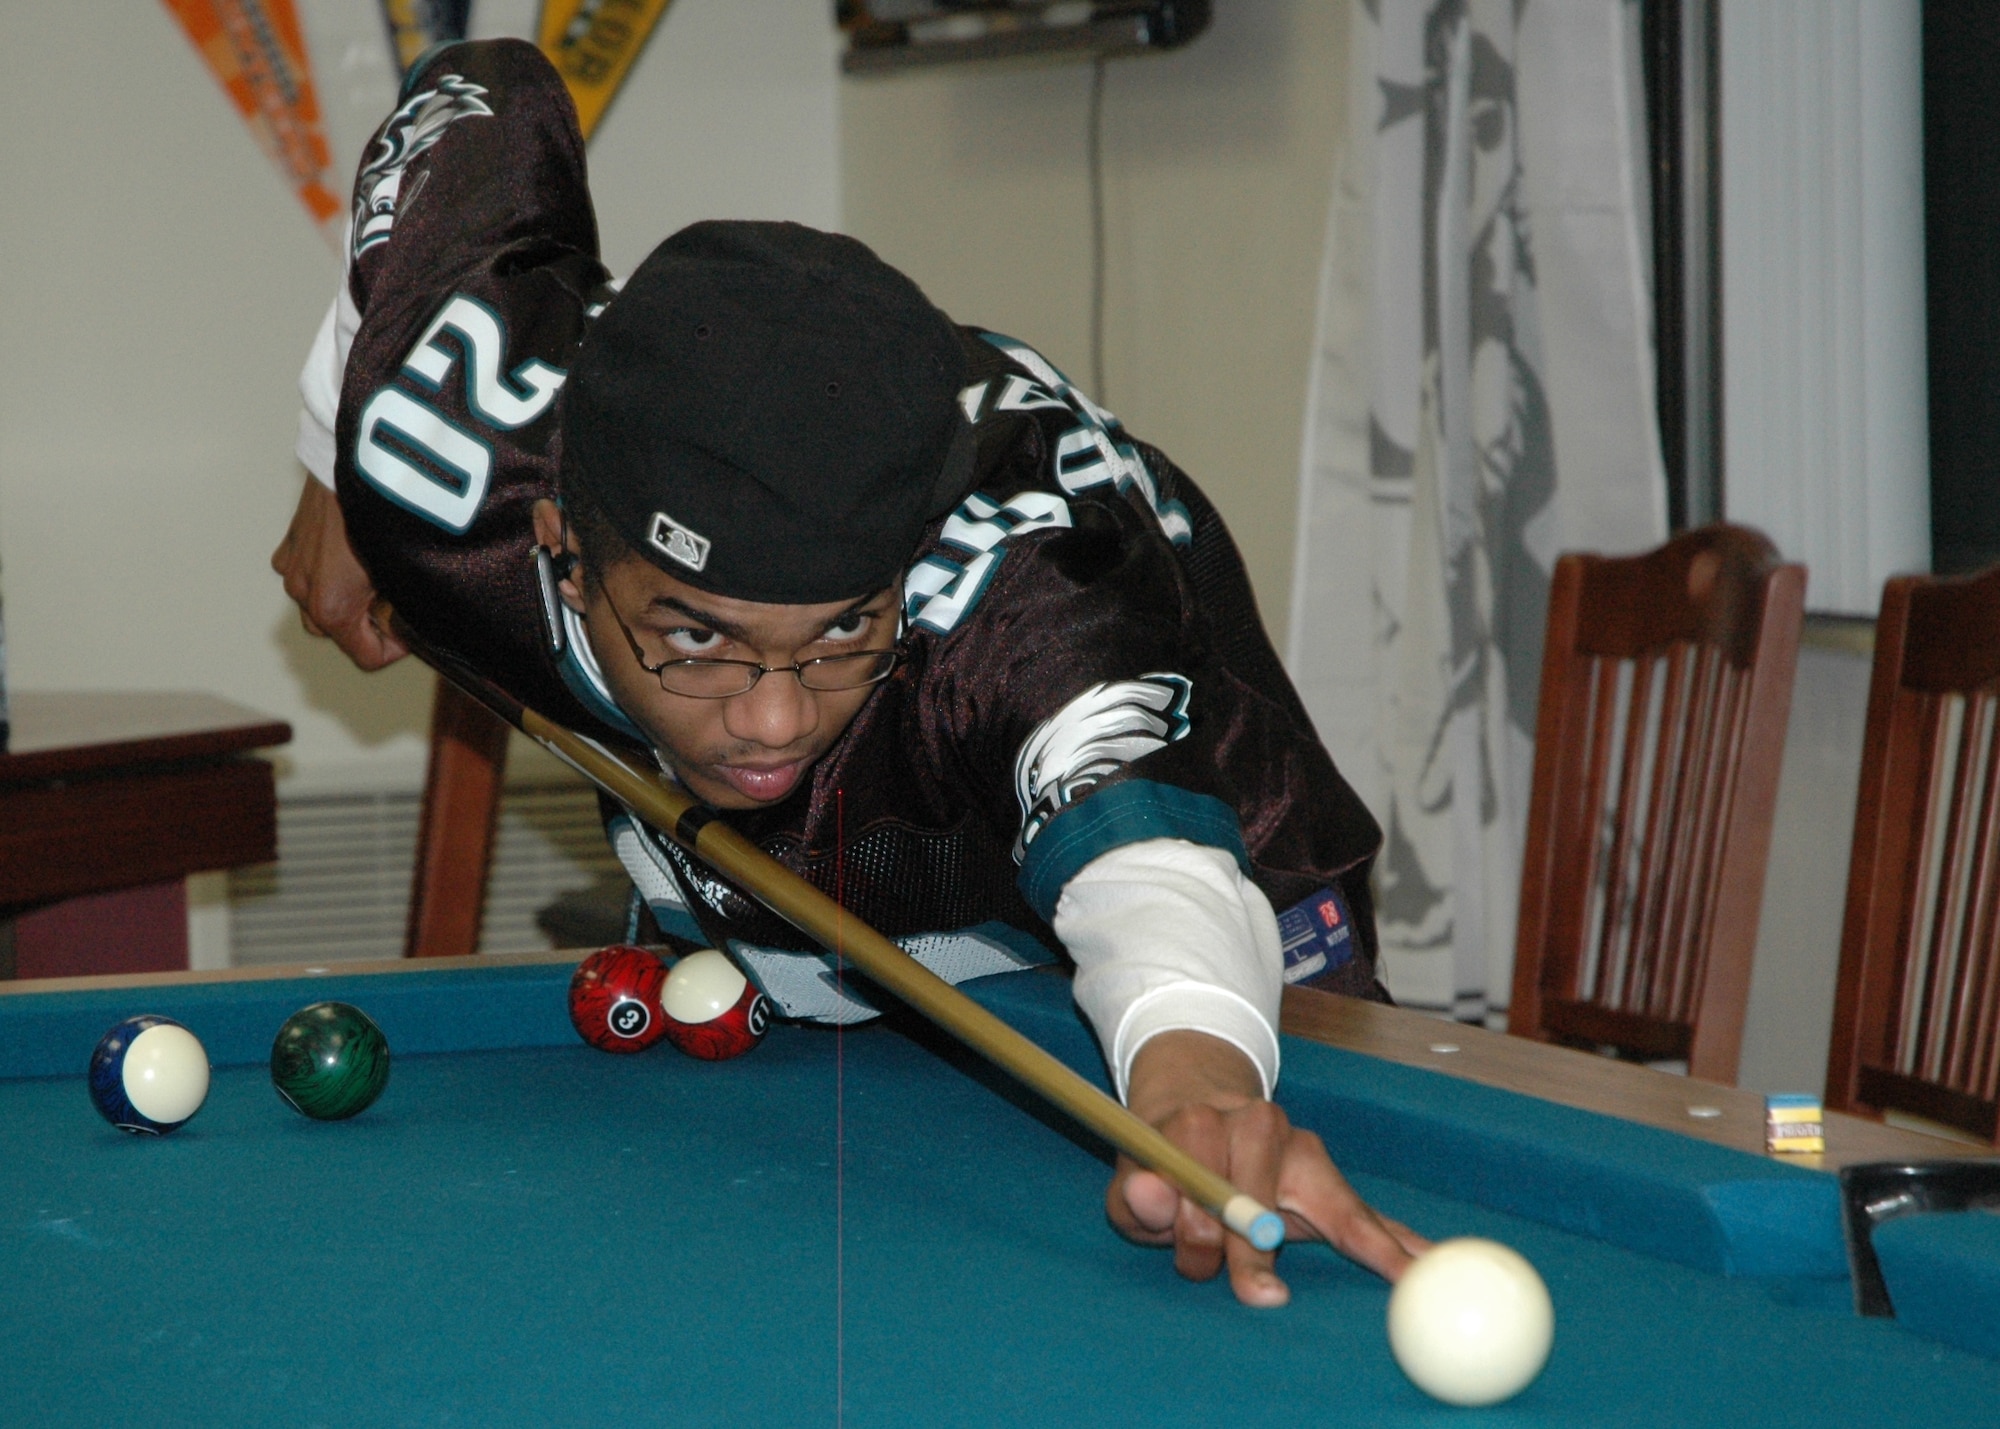 Airman 1st Class Eric Lewis, 96th Medical Support Squadron laboratory technician, cues up a game of pool while watching the NFL Super Bowl Feb. 6. The football match drew 37 dorm residents to Eglin's new Airmen Center called "Lighthouse" located in Dorm 18 D's third floor. Entrance for the facility is accessible from the Airmen Leadership School's parking lot. (U.S. Air Force photo/Chrissy Cuttita)